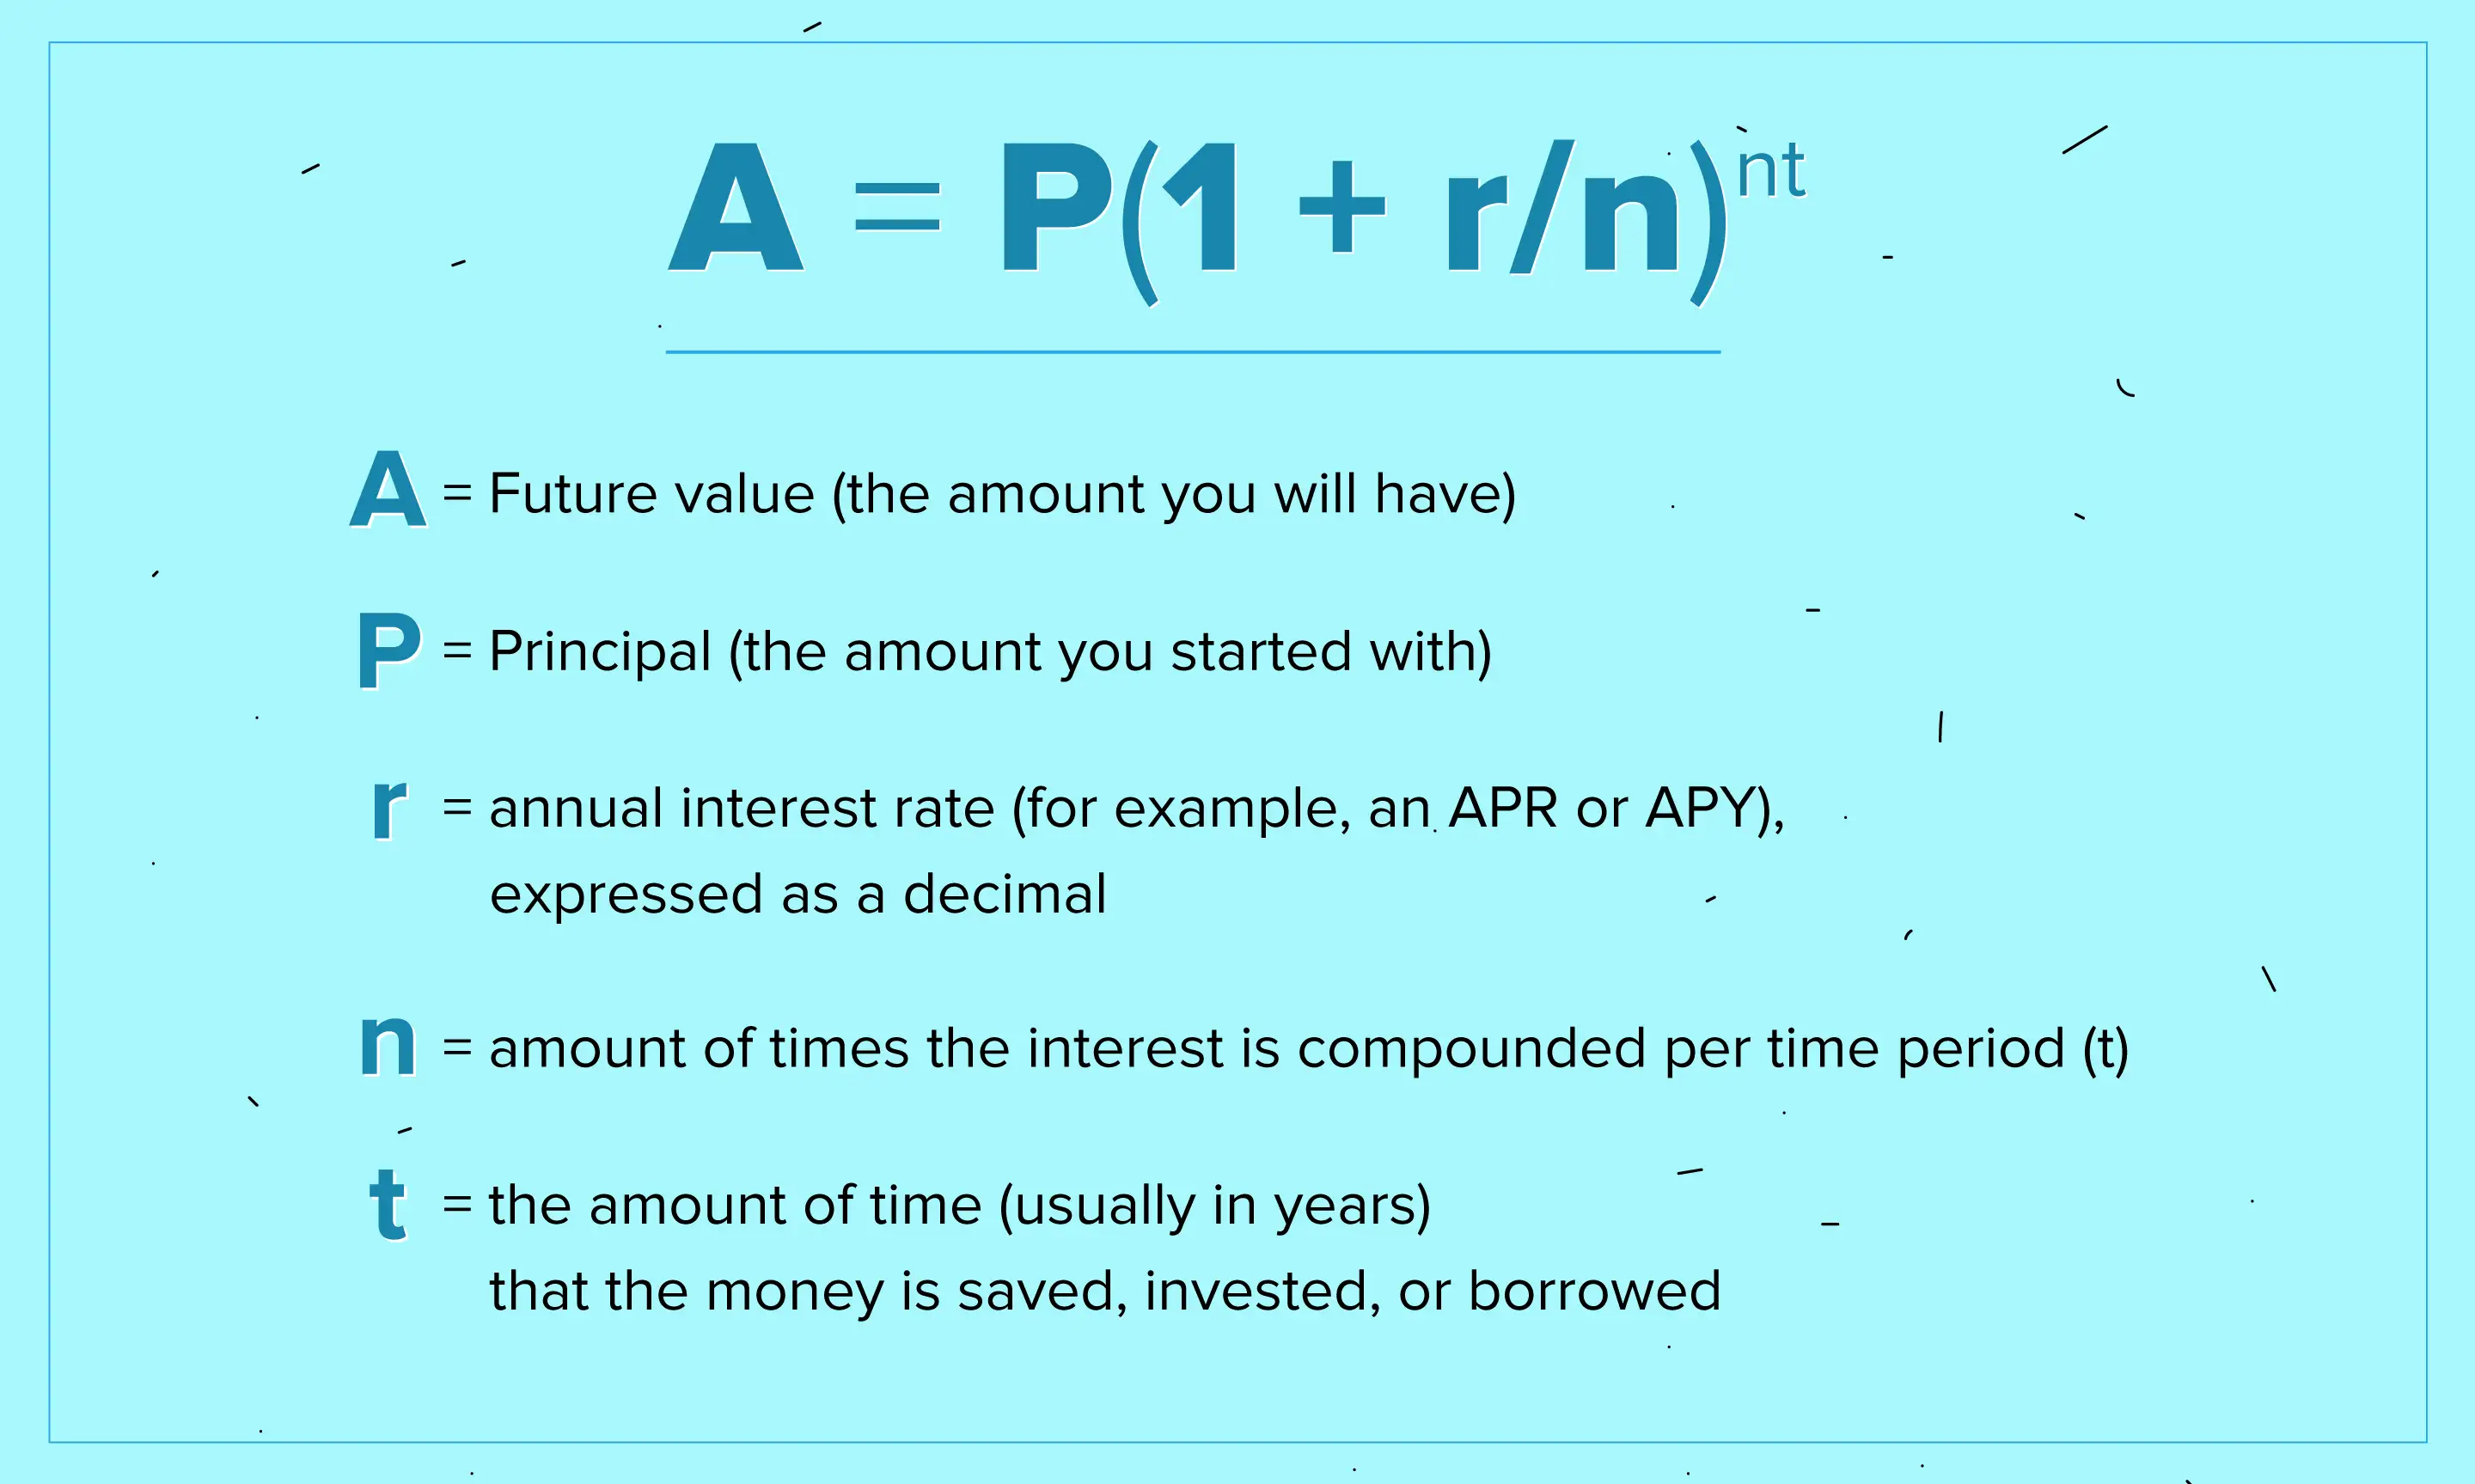 The compound interest formula is A = P(1+r/n) to the power of nt